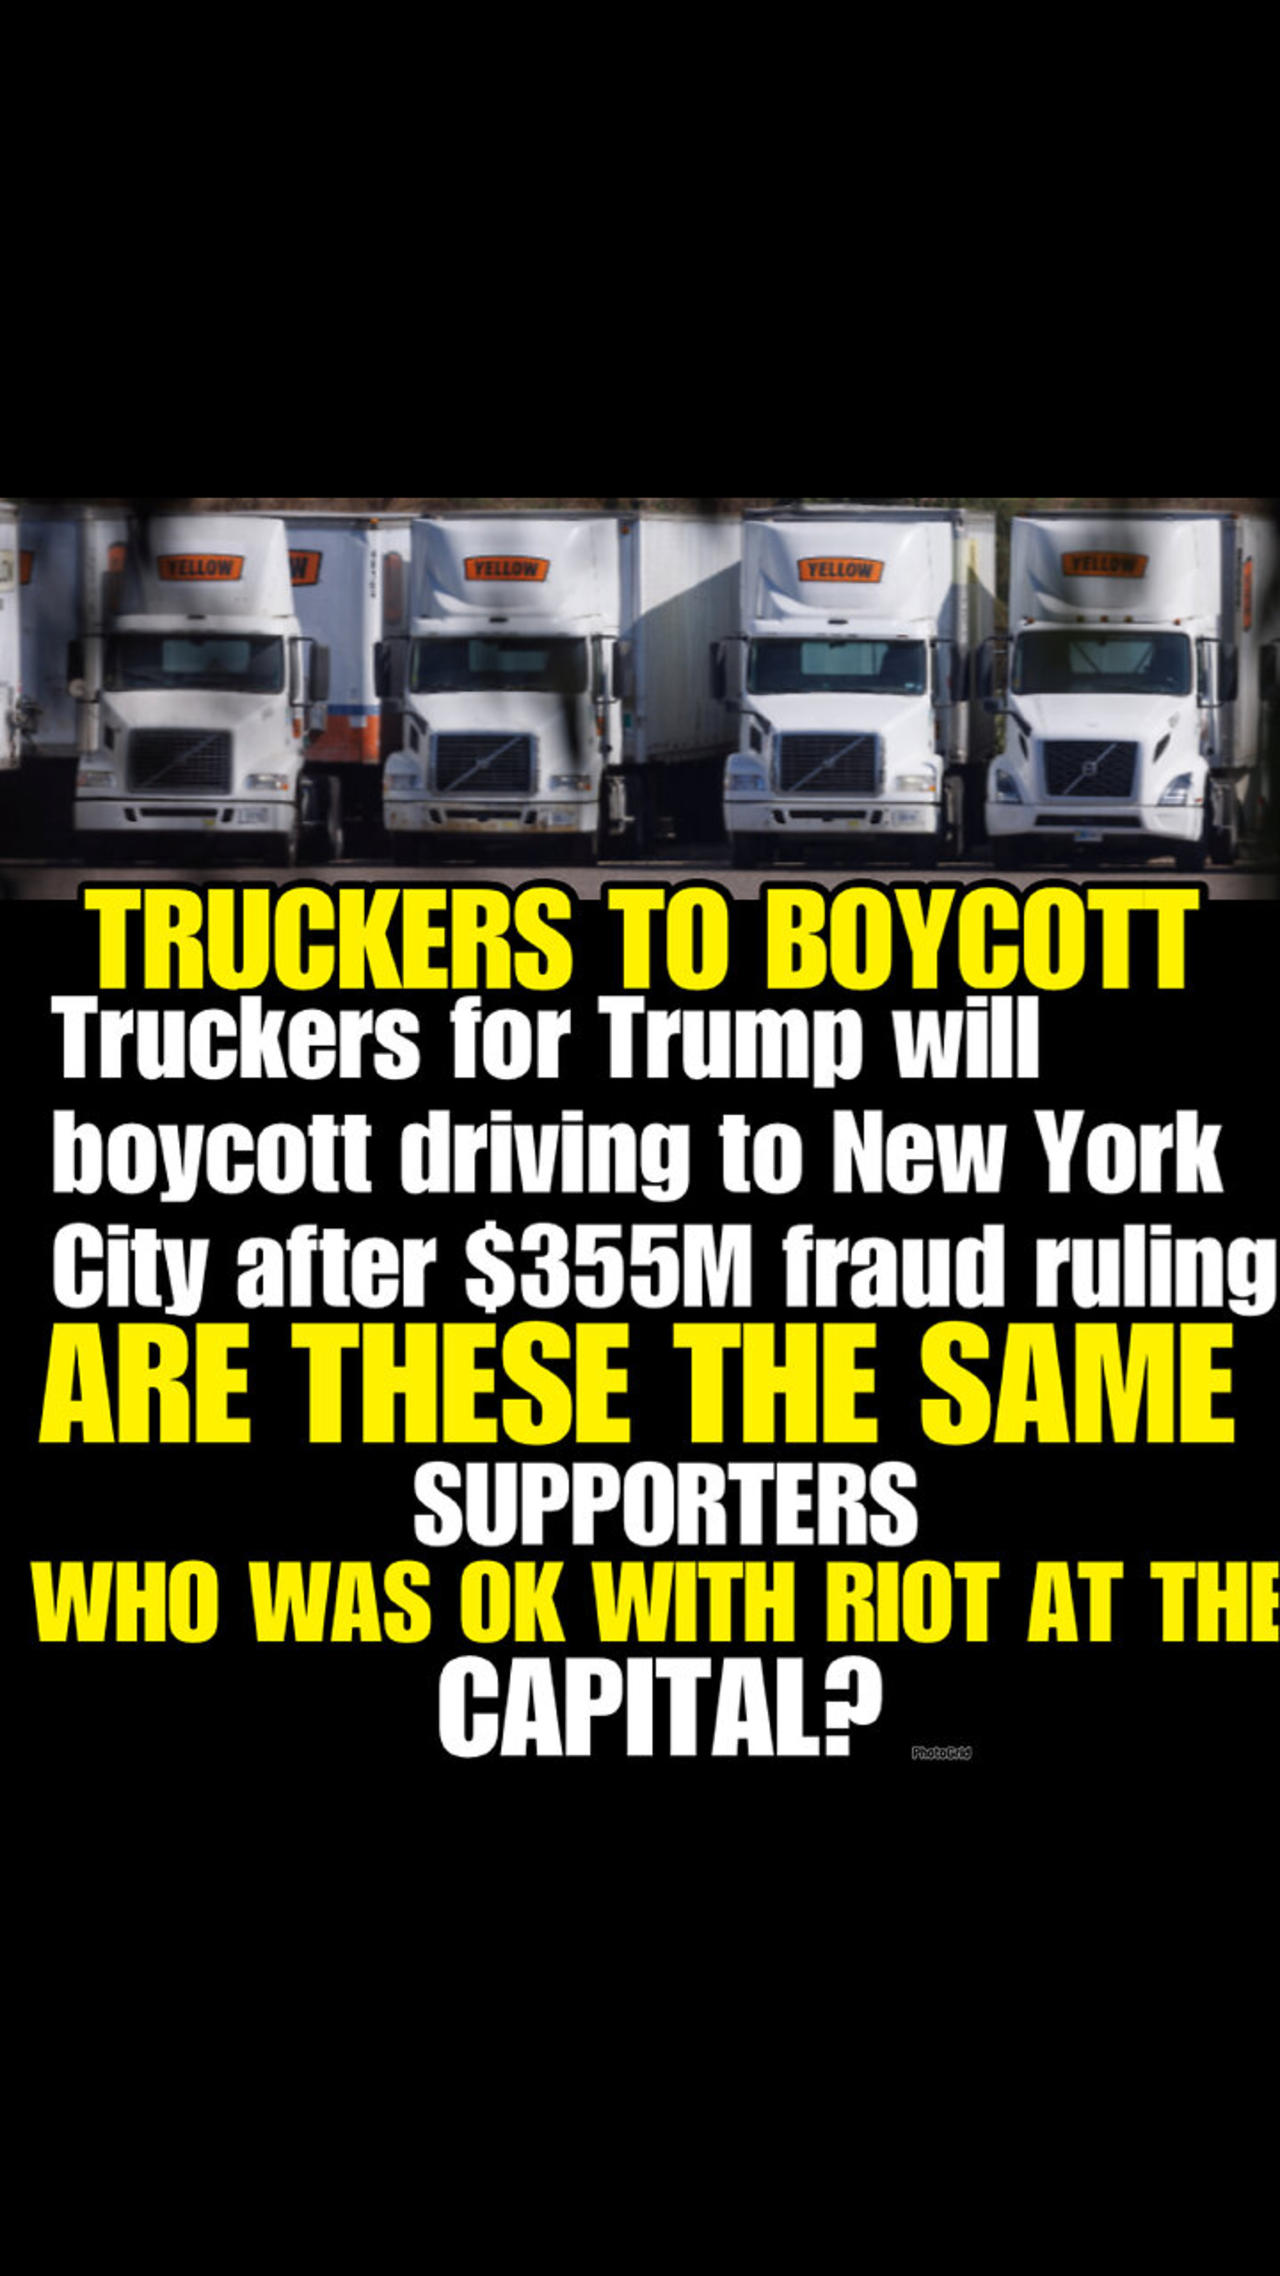 NIMH Ep #776 Truckers for Trump will boycott driving to New York City after $355M fraud ruling